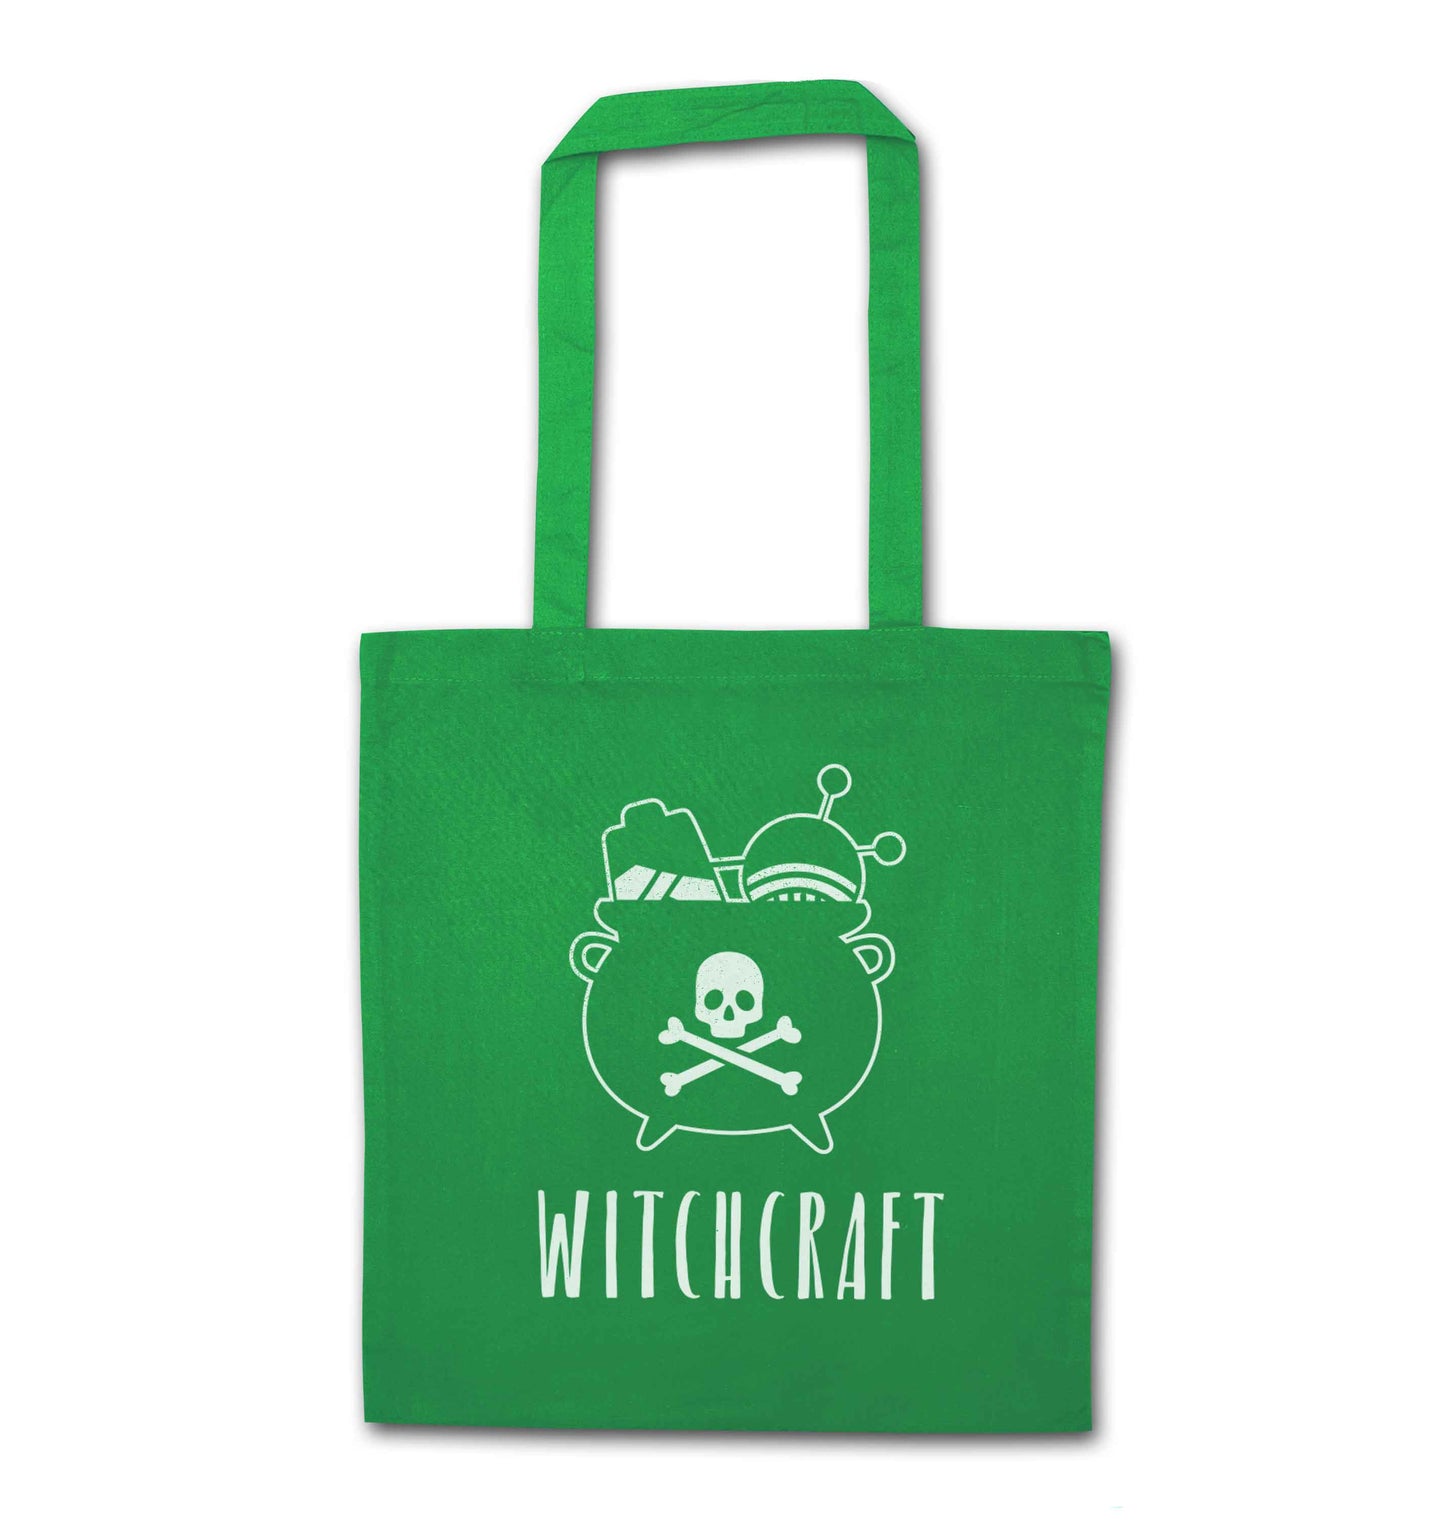 Witchcraft green tote bag